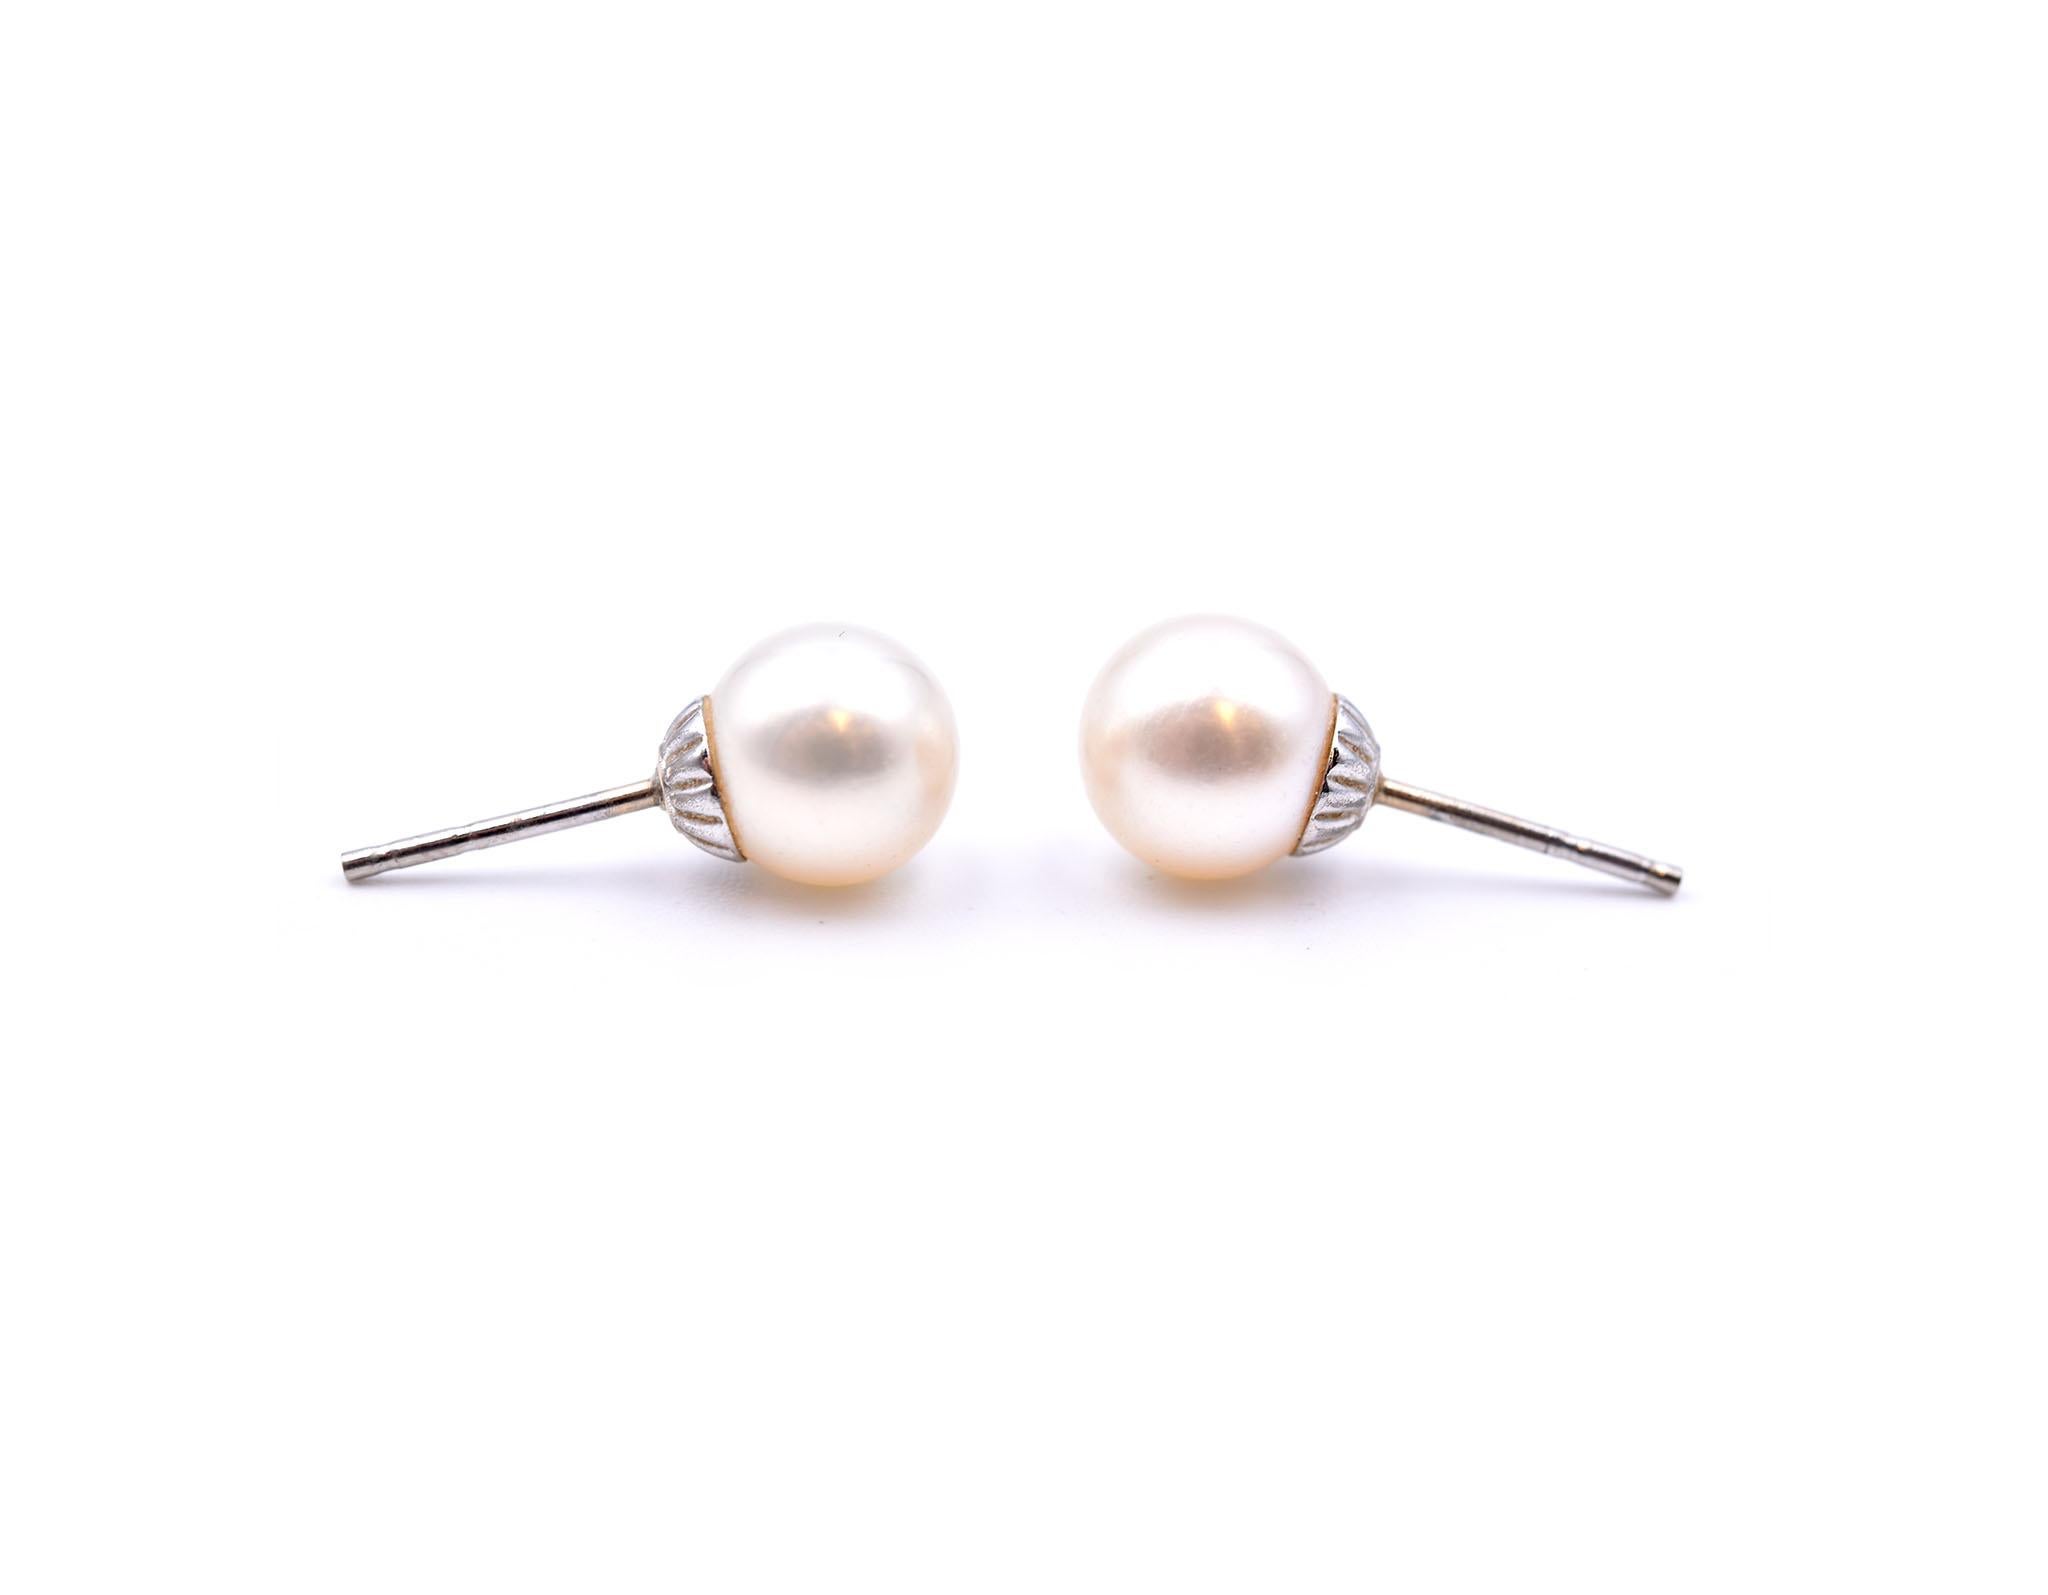 Designer: custom design
Material: 14k white gold
Pearls: 2 pearls approximate diameter 7.72mm
Fastenings: post with friction backs
Dimensions: earring measure 11.23mm in height
Weight: 2.07 grams
